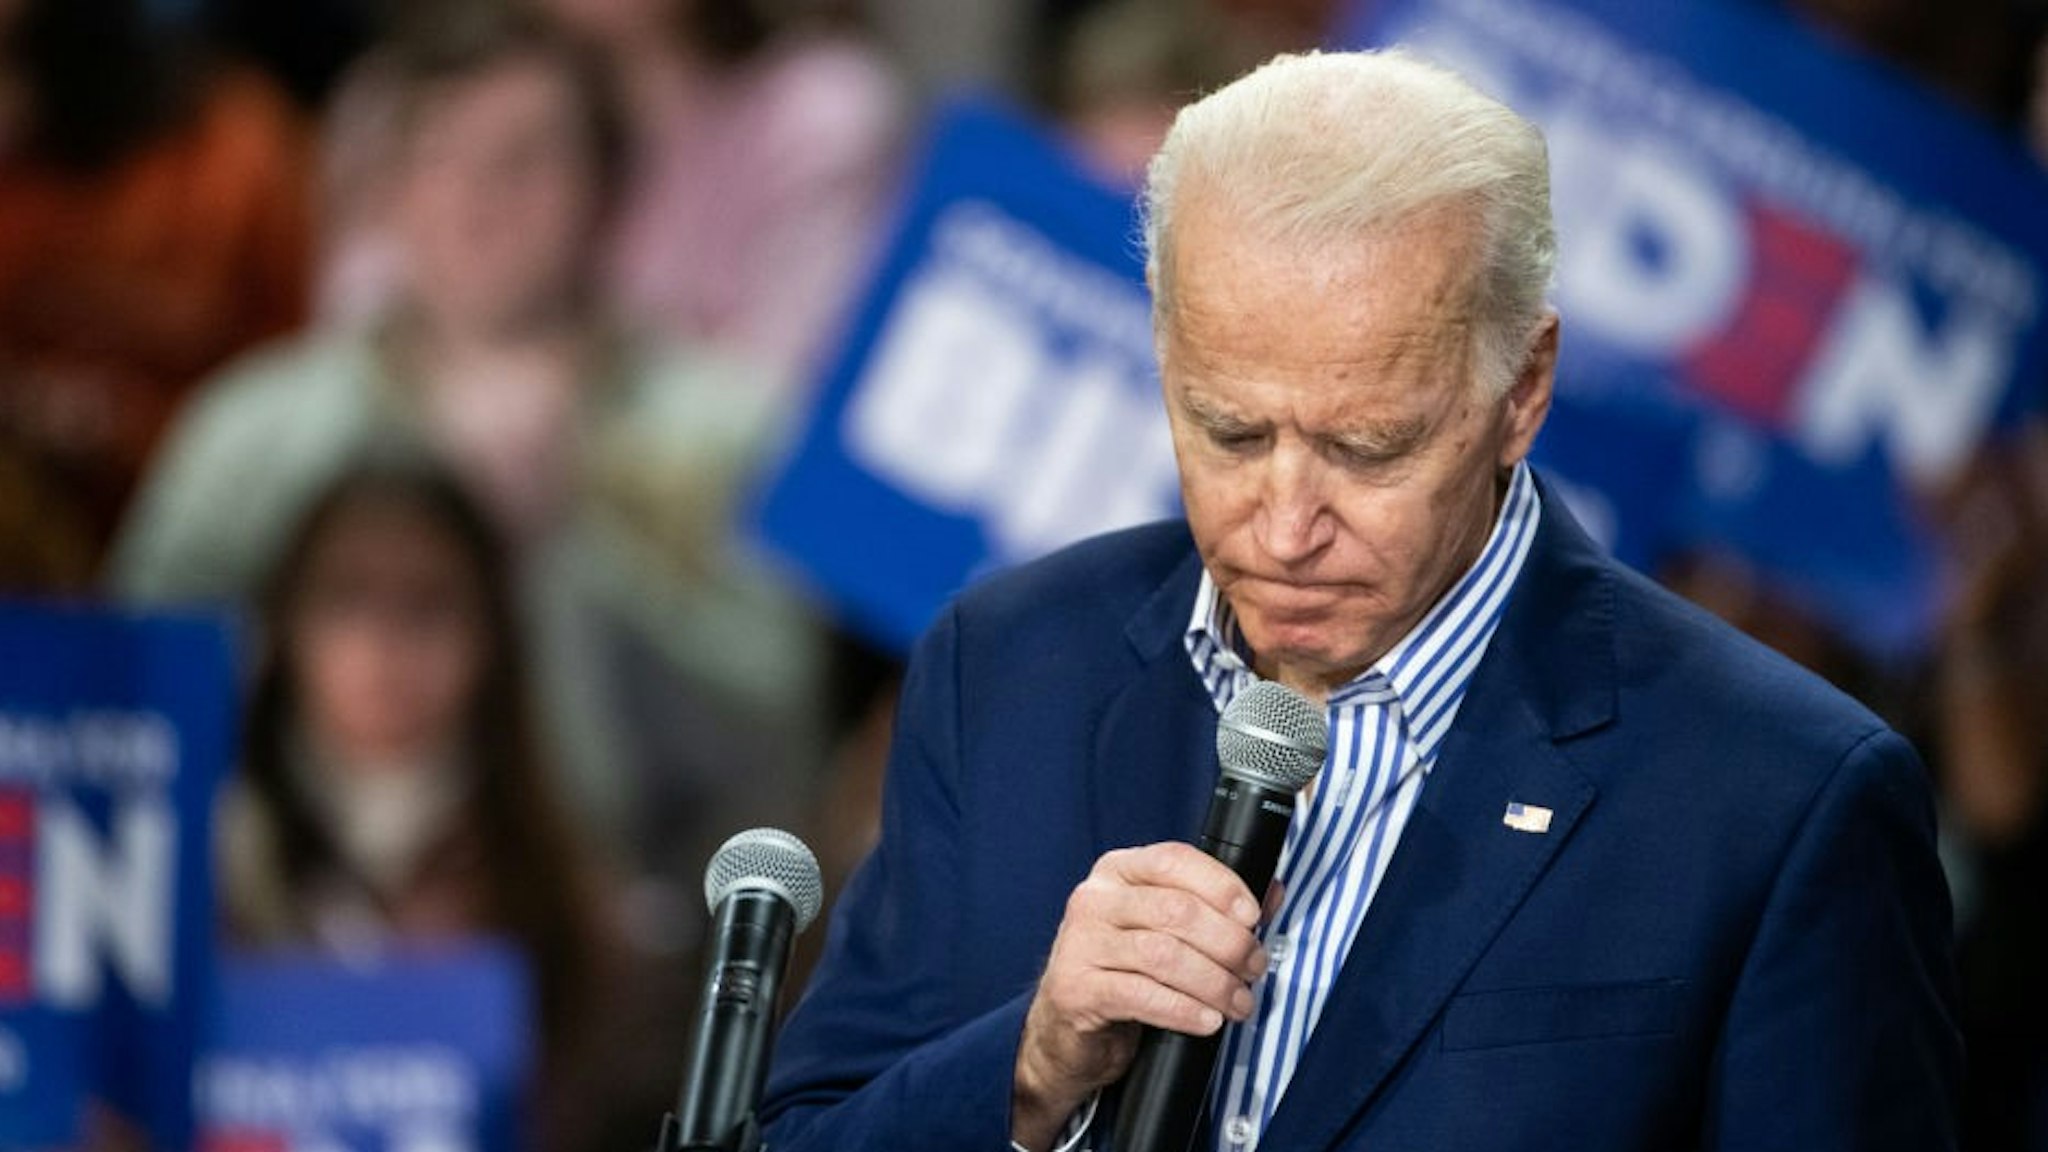 Democratic presidential candidate former Vice President Joe Biden addresses a crowd during a campaign event at Wofford University February 28, 2020 in Spartanburg, South Carolina.